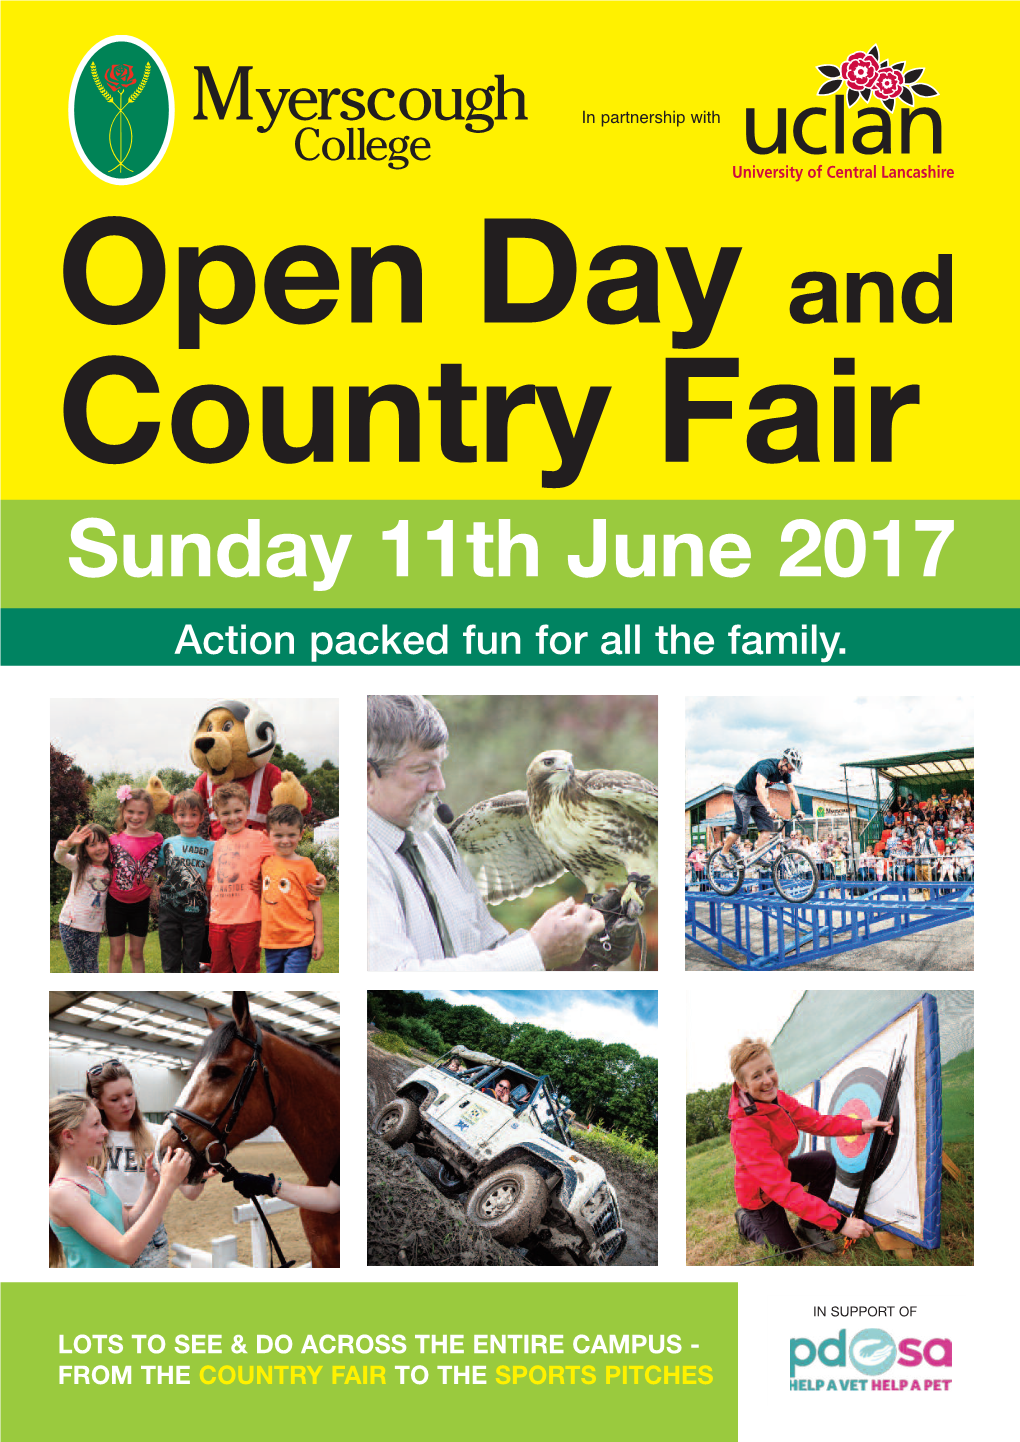 Sunday 11Th June 2017 Action Packed Fun for All the Family